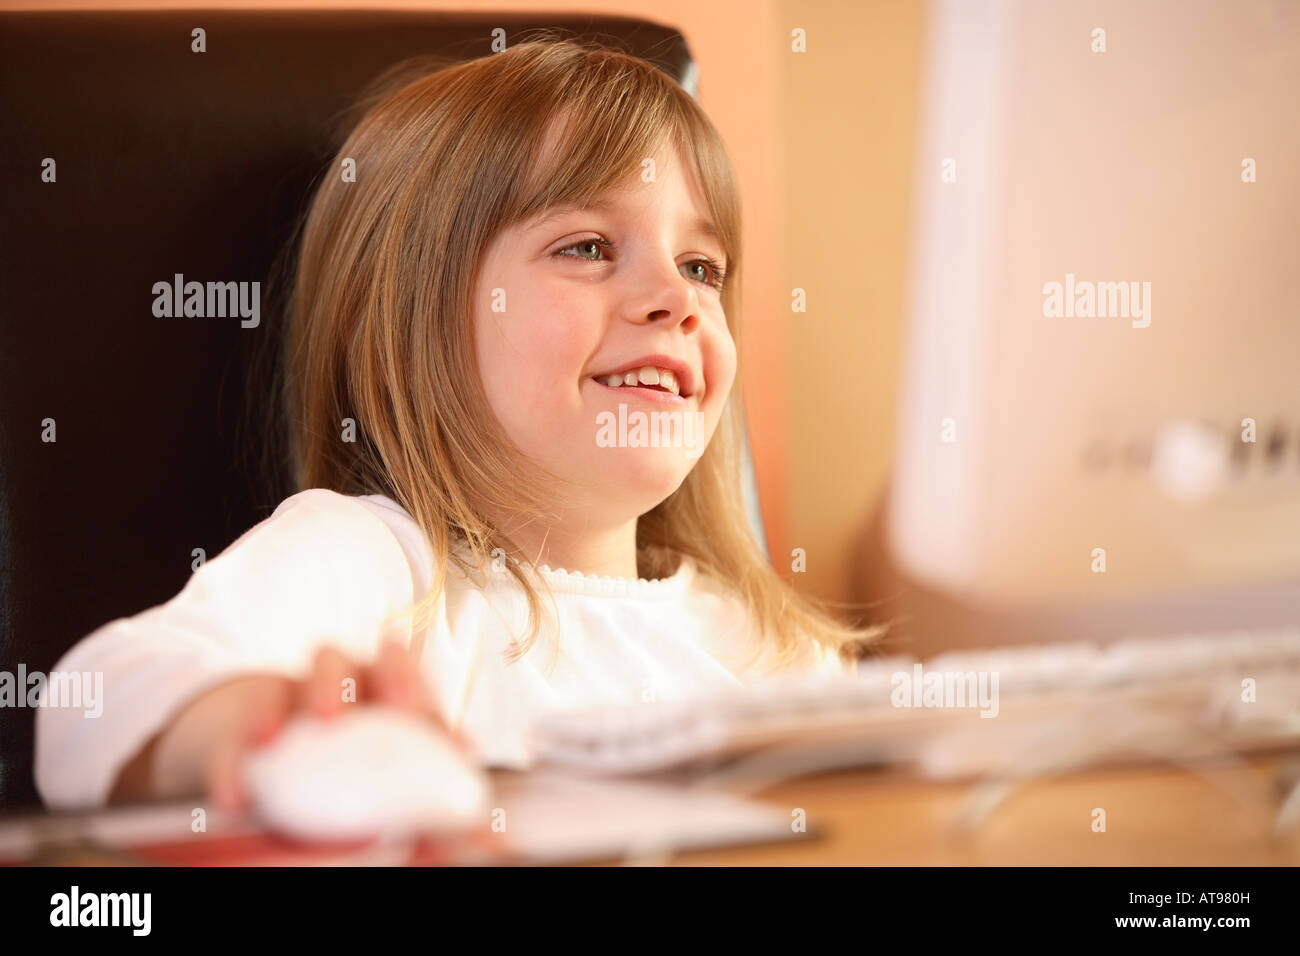 Child working at a computer Stock Photo